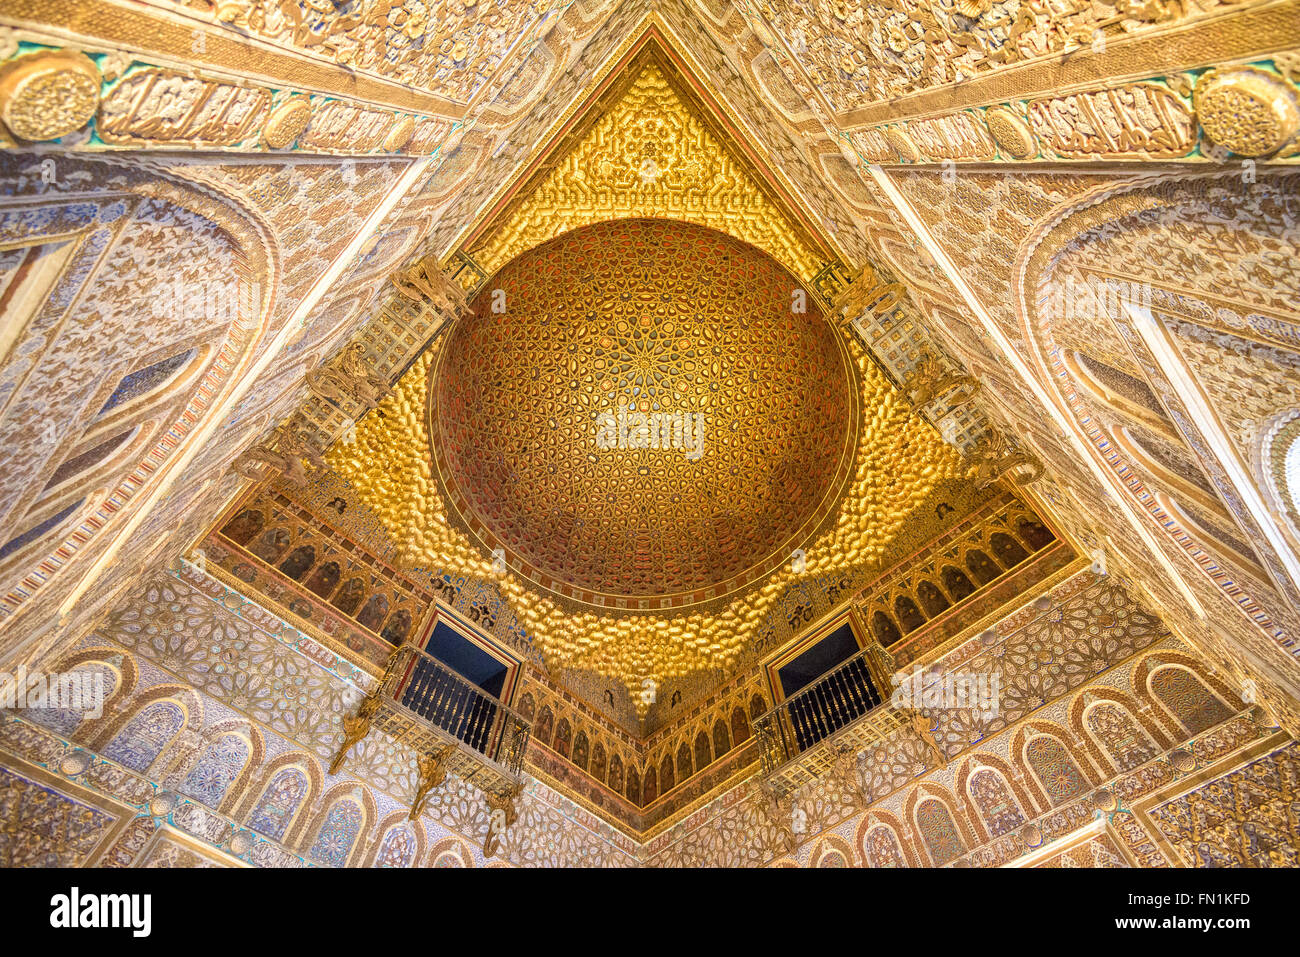 The ceiling of the Royal Alcazar of Seville. It is the oldest royal palace still in use in Europe. Stock Photo